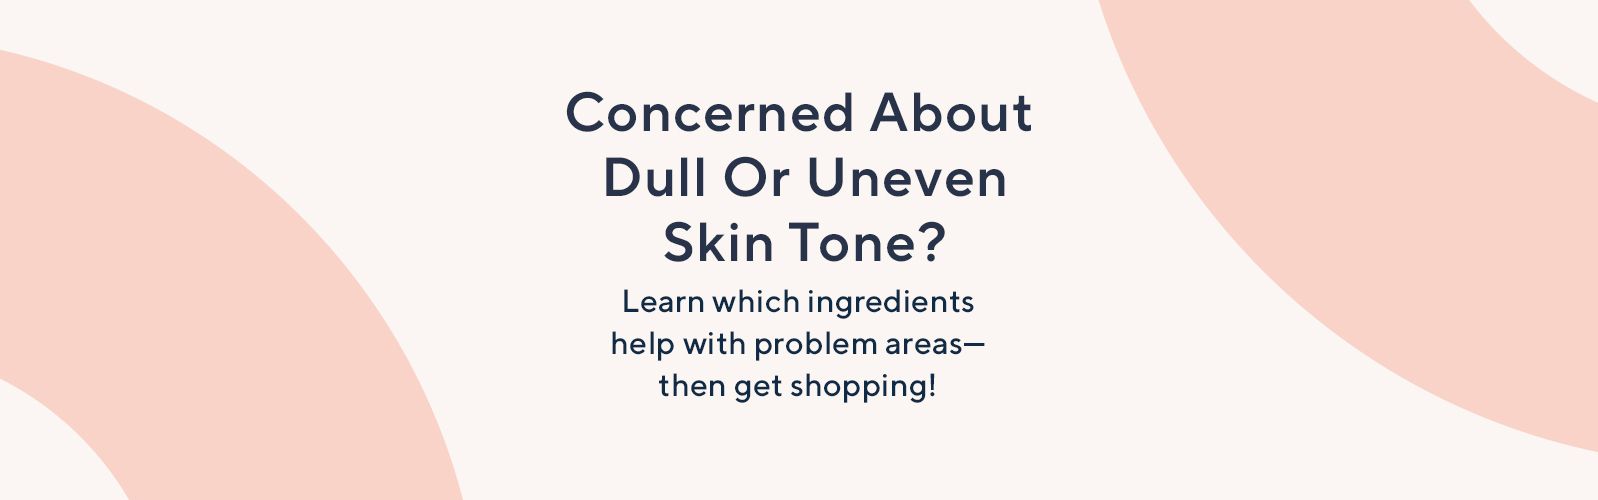 Concerned About Dull Or Uneven Skin Tone?   Learn which ingredients help with problem areas—then get shopping!